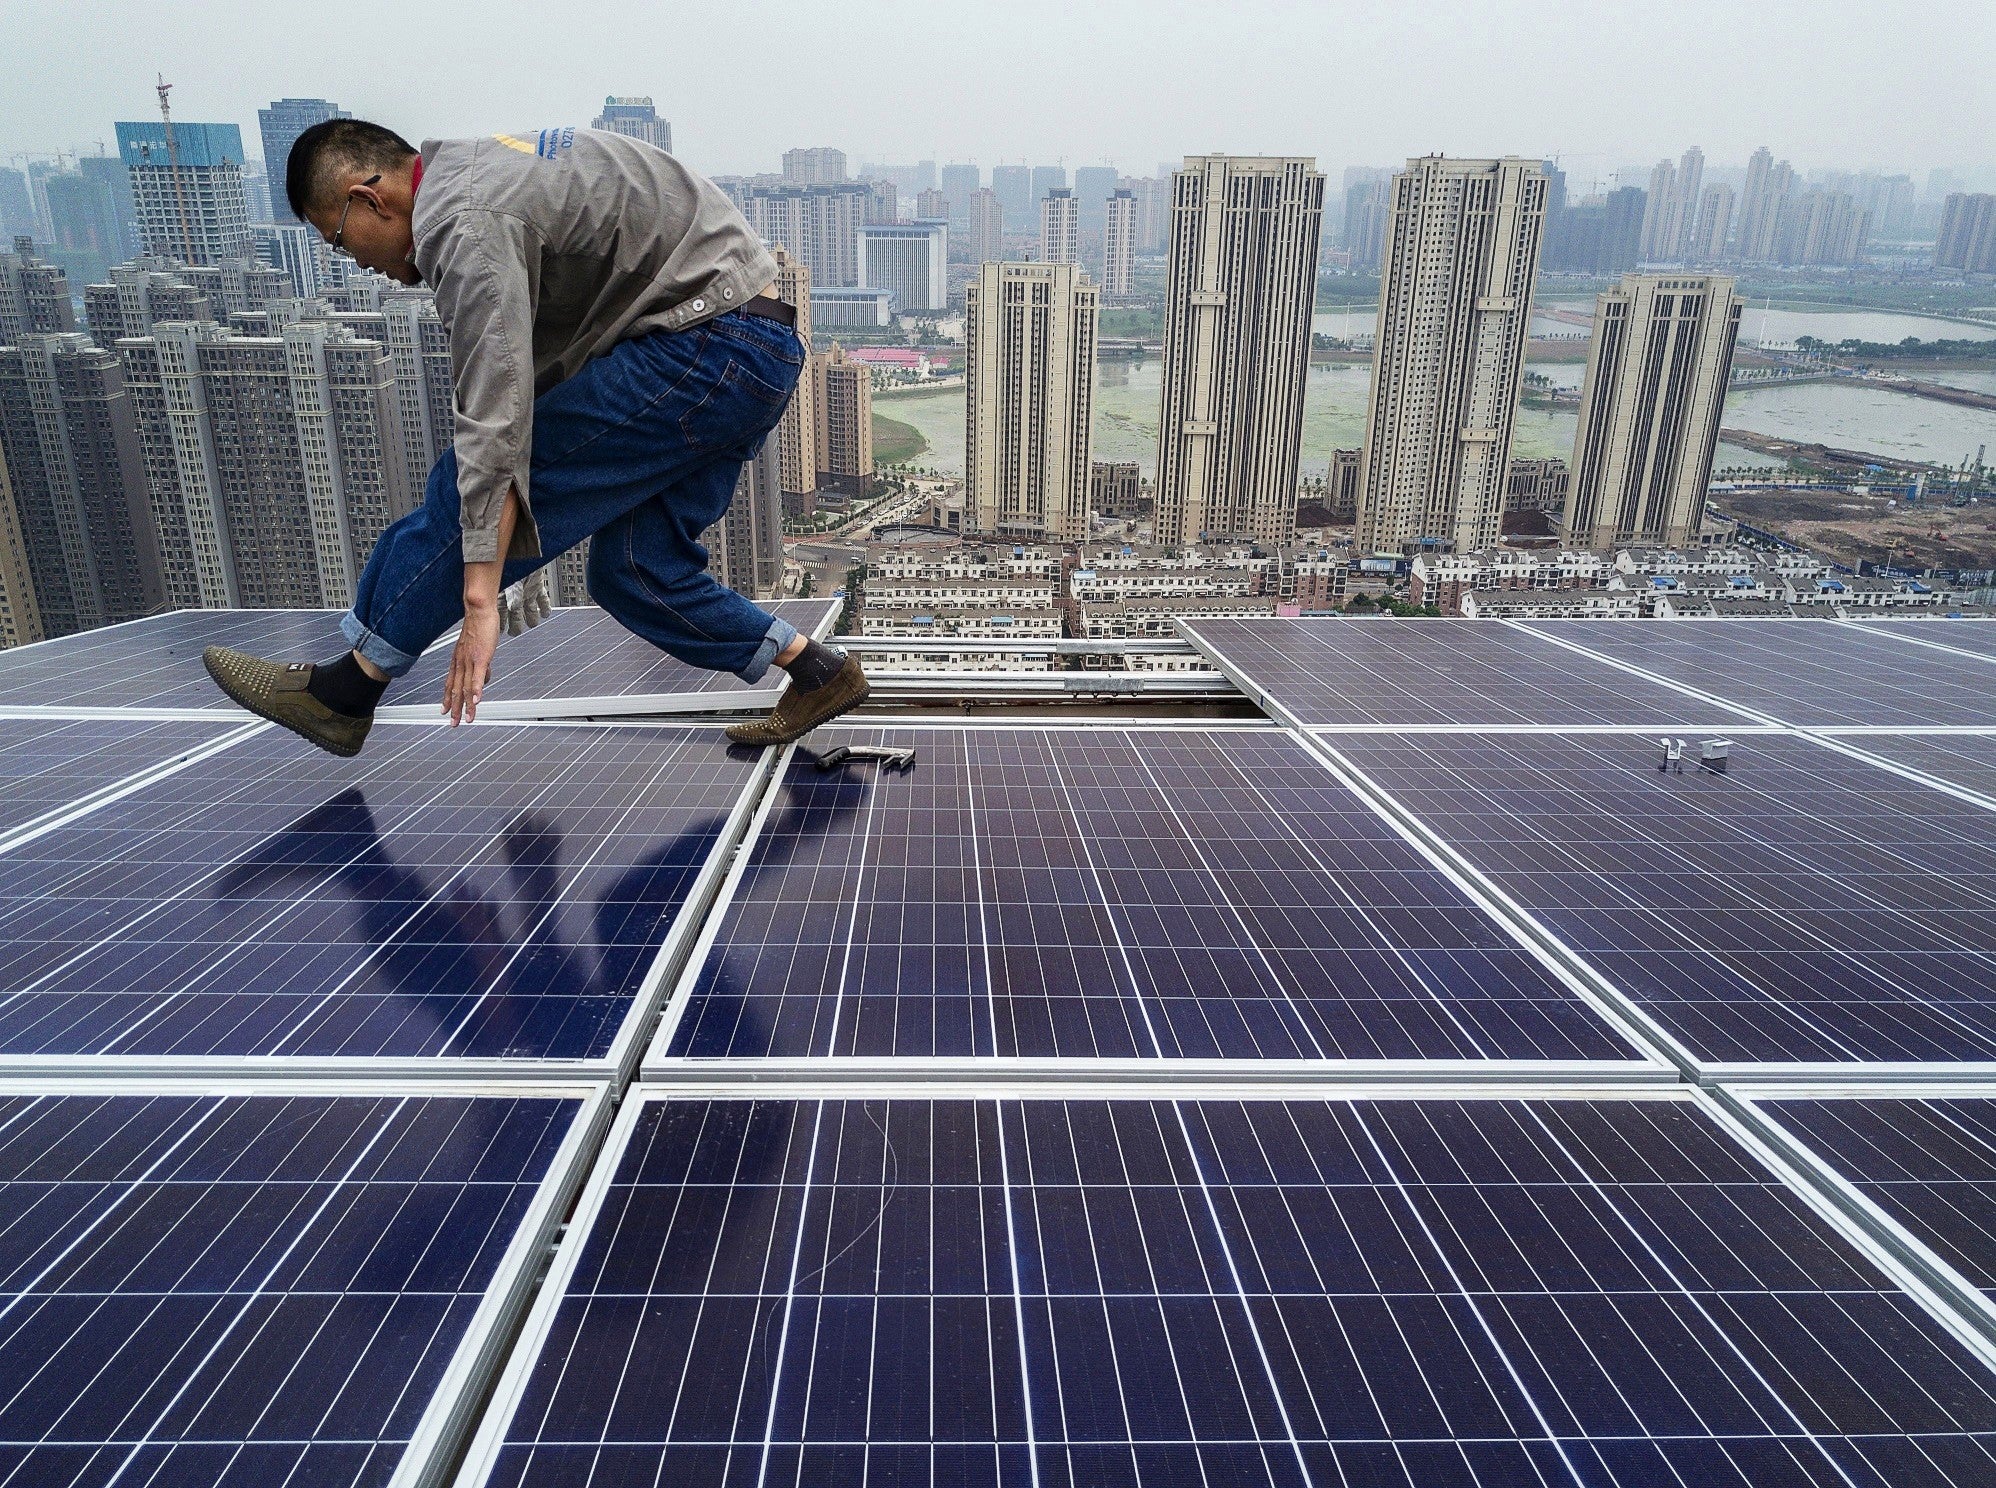 A Chinese worker installing solar panels on the roof of a 47 story building in Wuhan, China, on 15 May, 2017